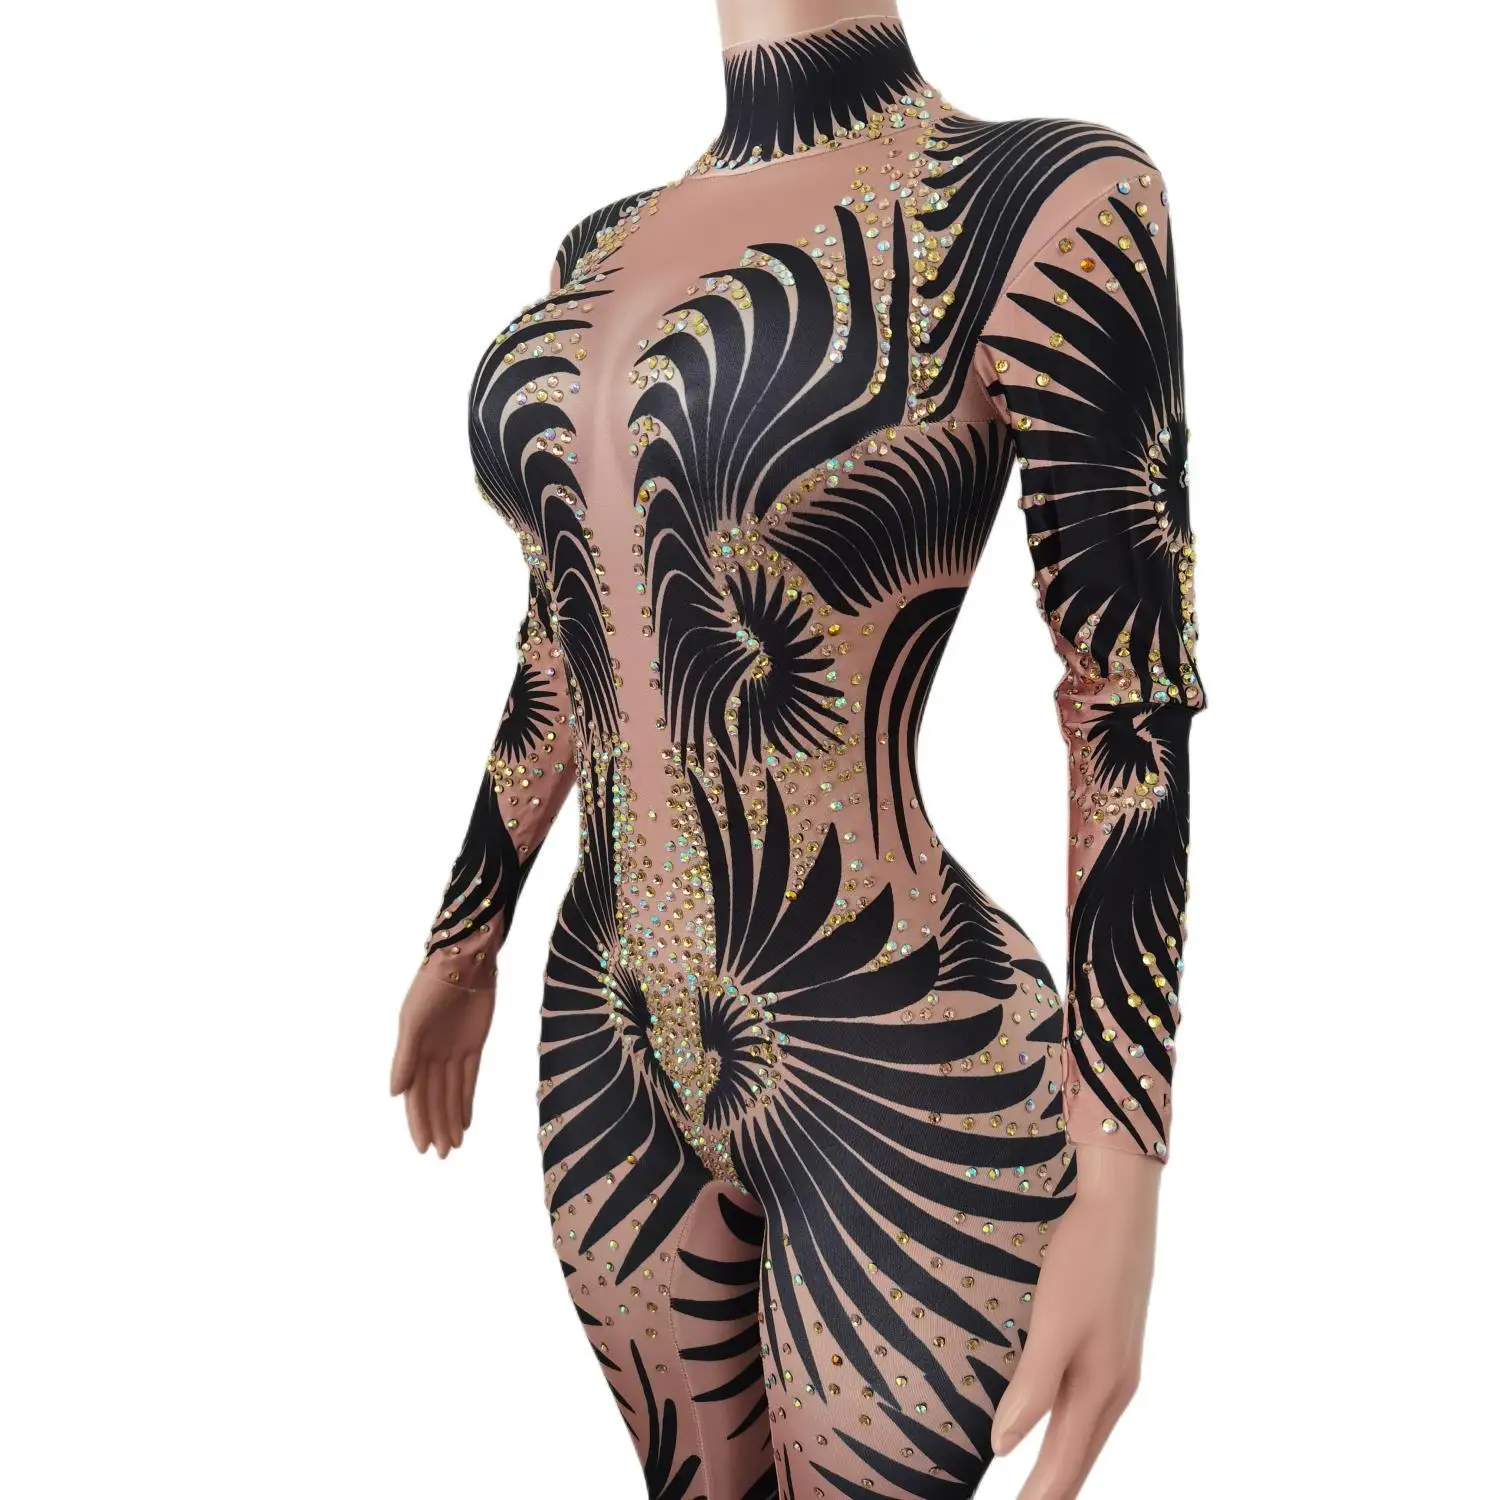 Sparkly Stone Feather Print Jumpsuit Women Sexy Birthday Party Bodysuit Prom Dresses Pole Dancer Performance Costume Feibiao